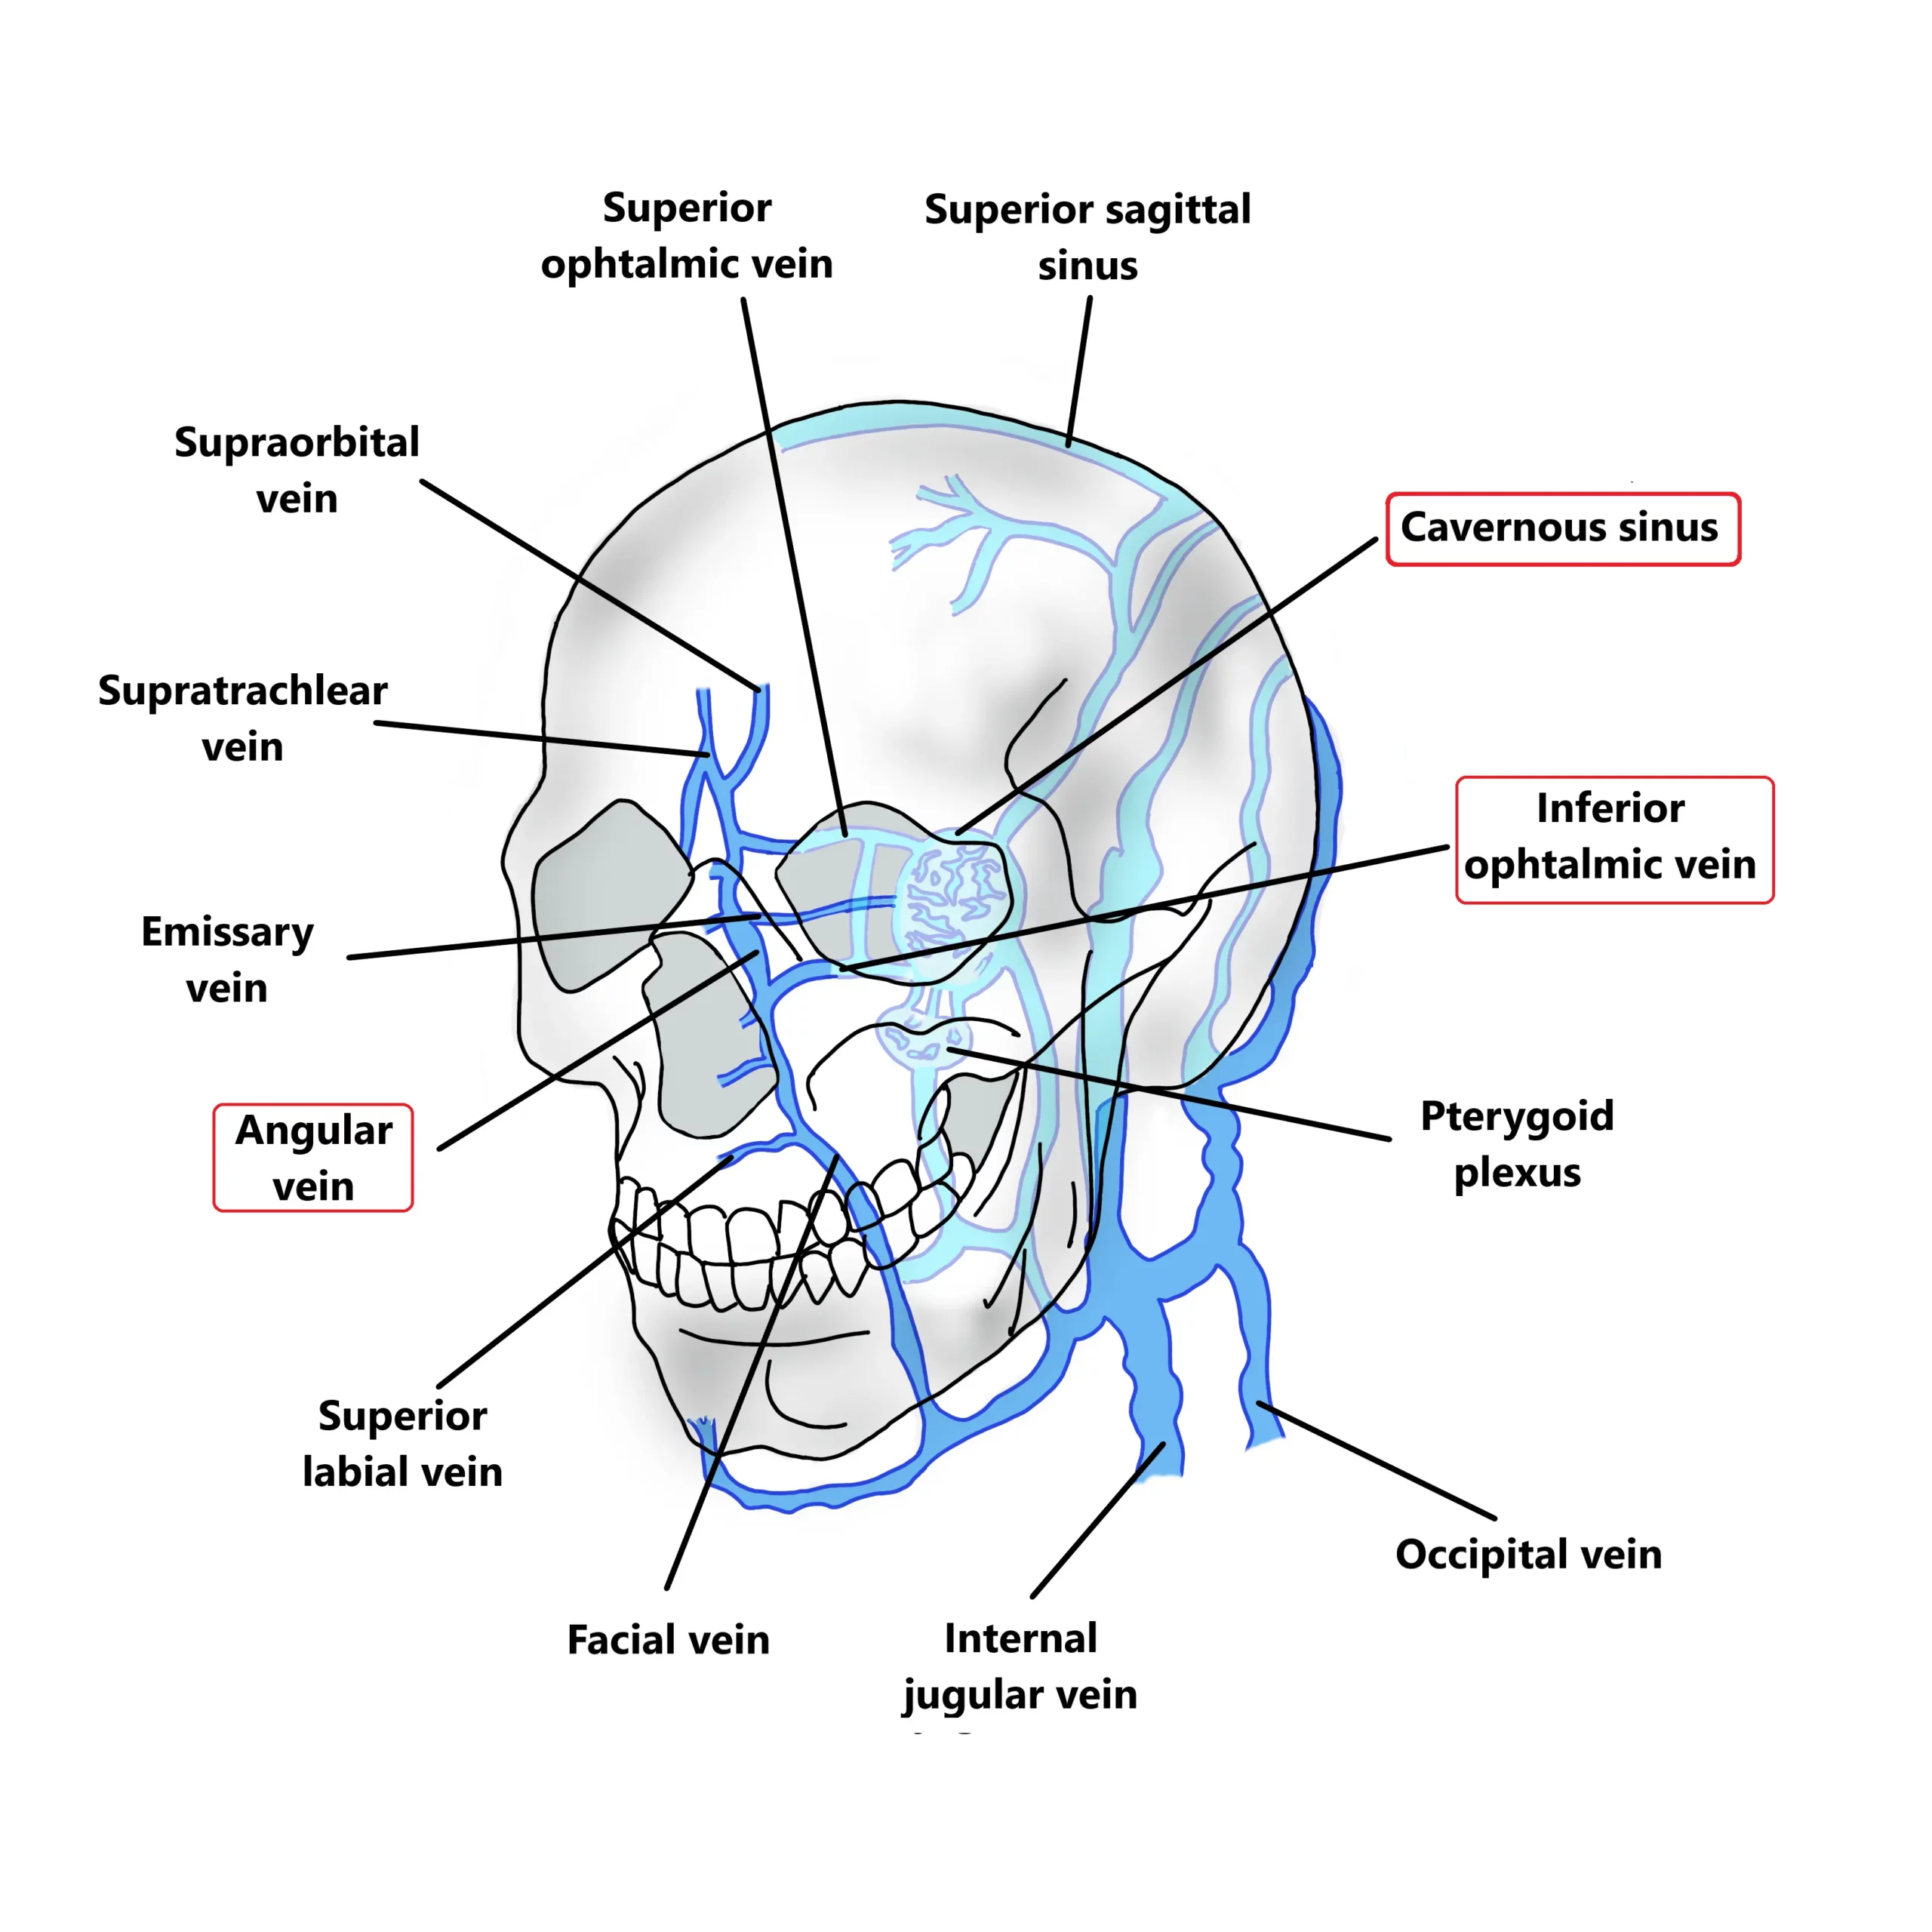 Clinical Importance of Dural Sinuses